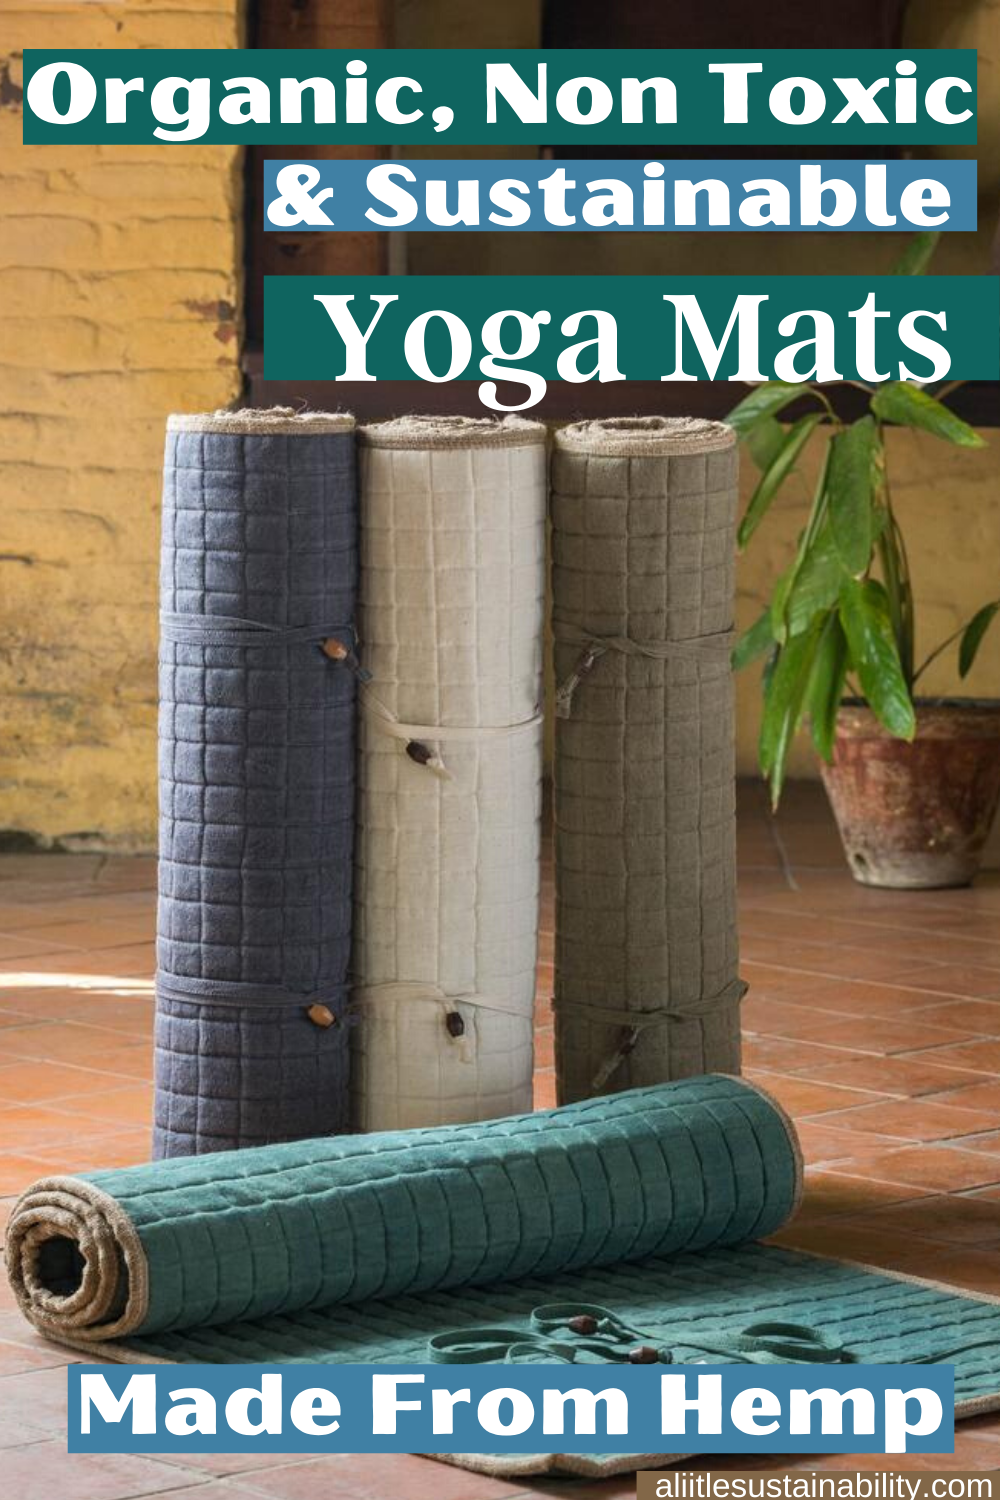 7 Non-toxic and Sustainable Yoga Mat Options That Are Responsibly